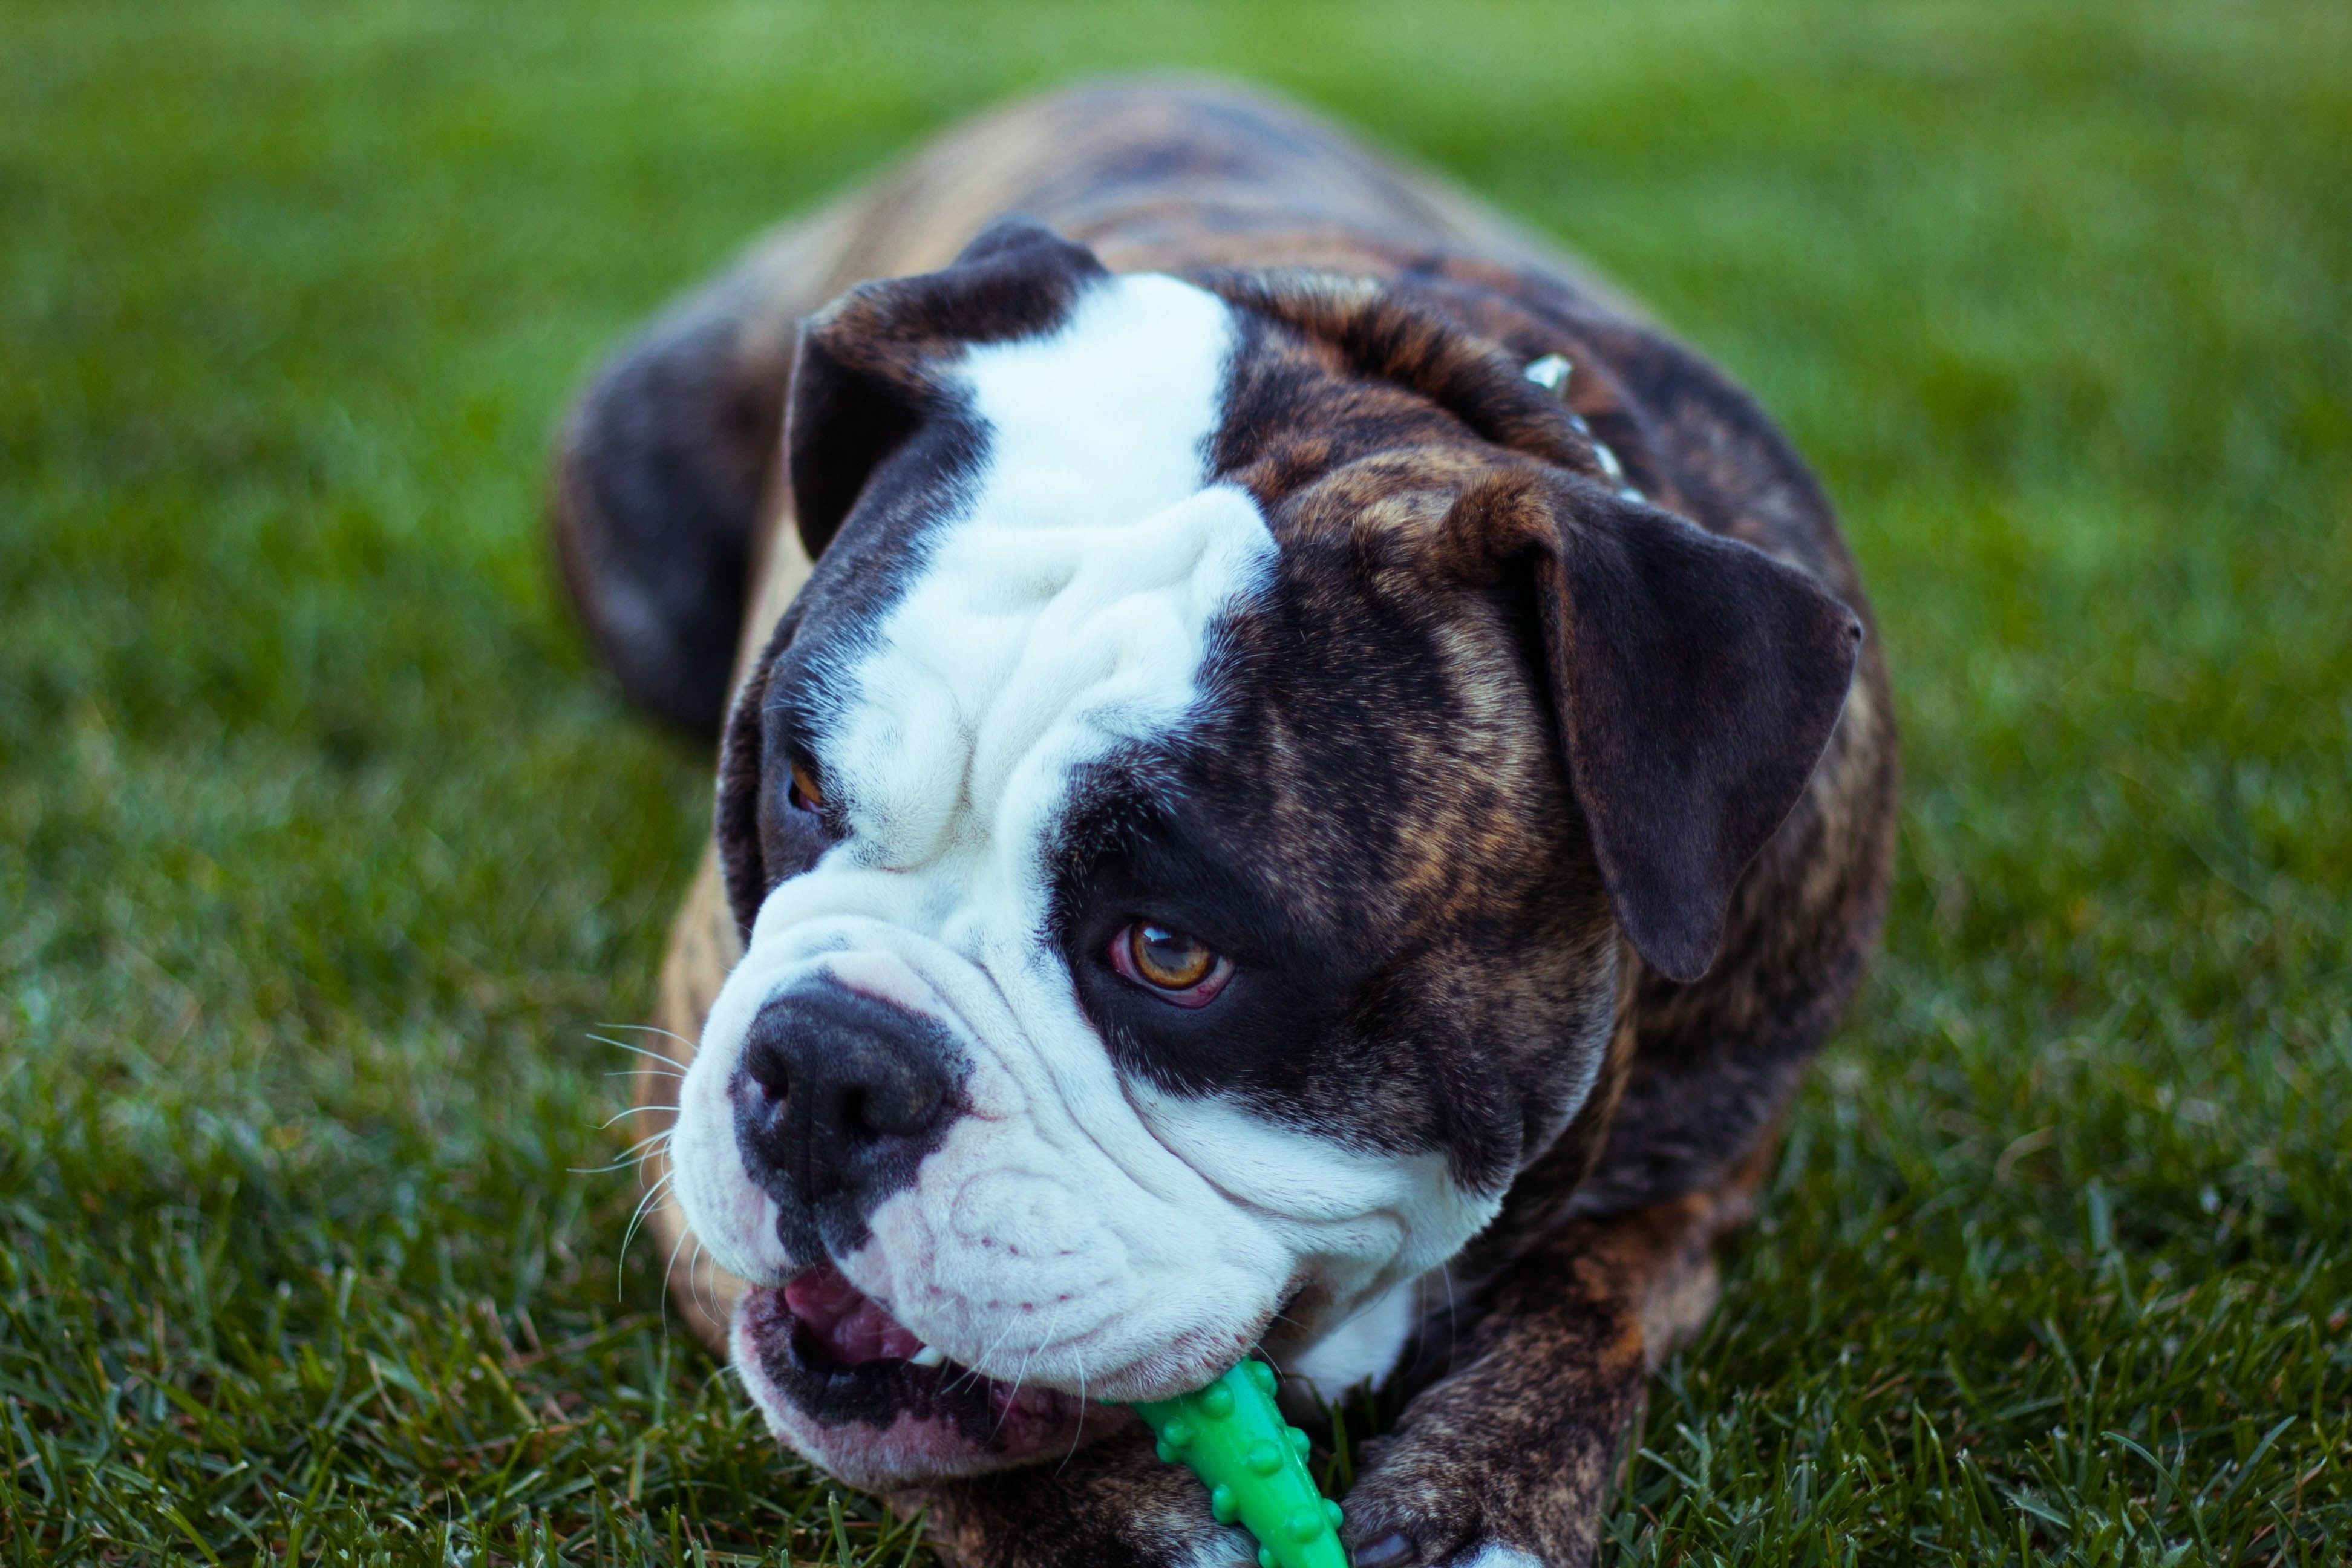 Bulldog playing with green toy in the grass.